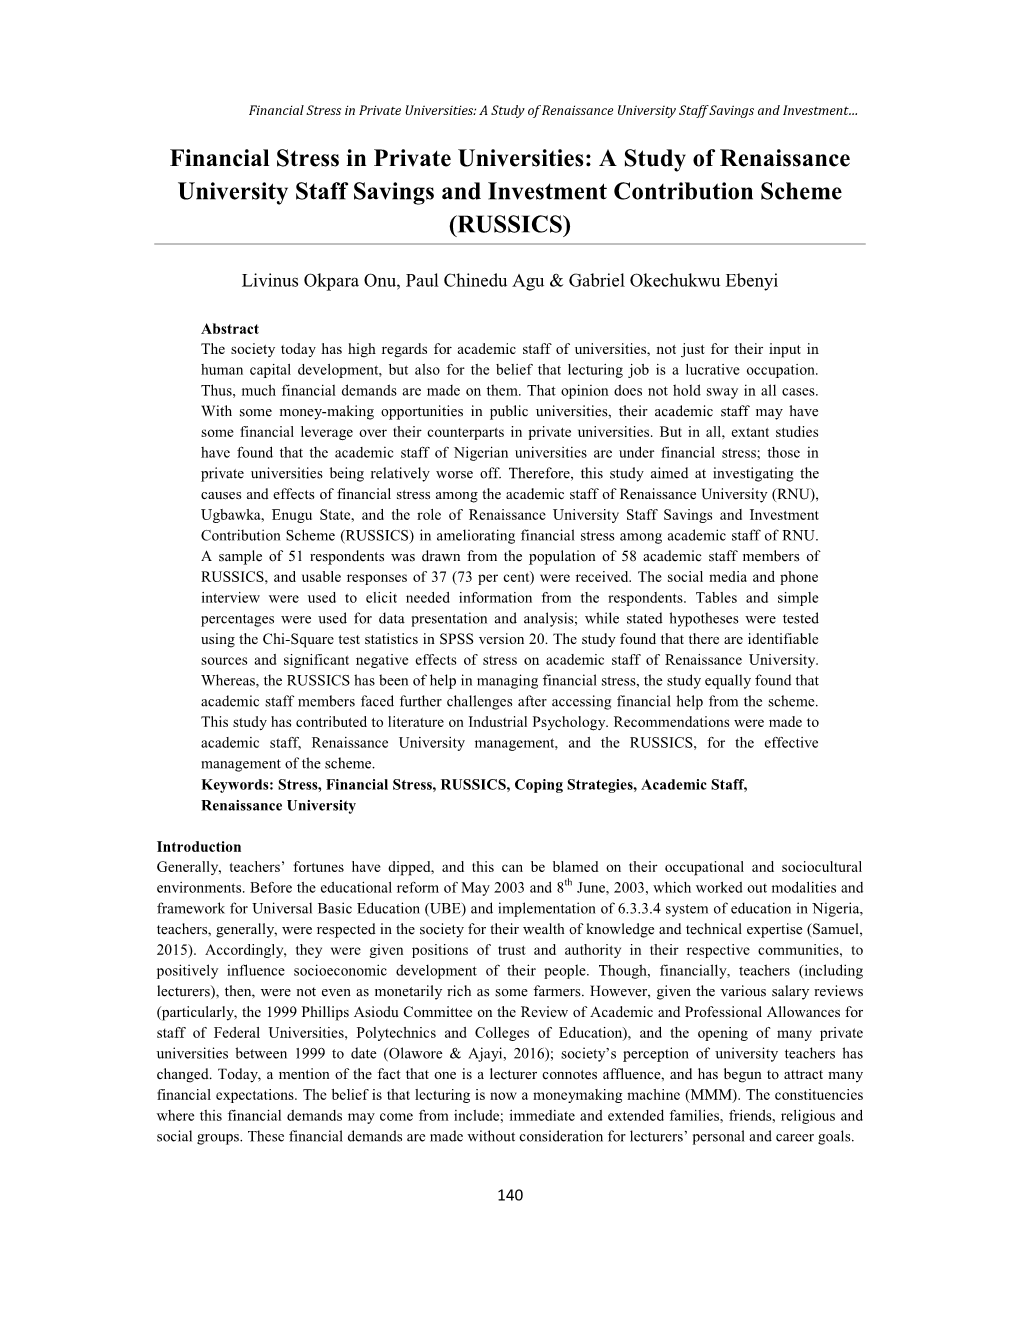 Financial Stress in Private Universities: a Study of Renaissance University Staff Savings and Investment…